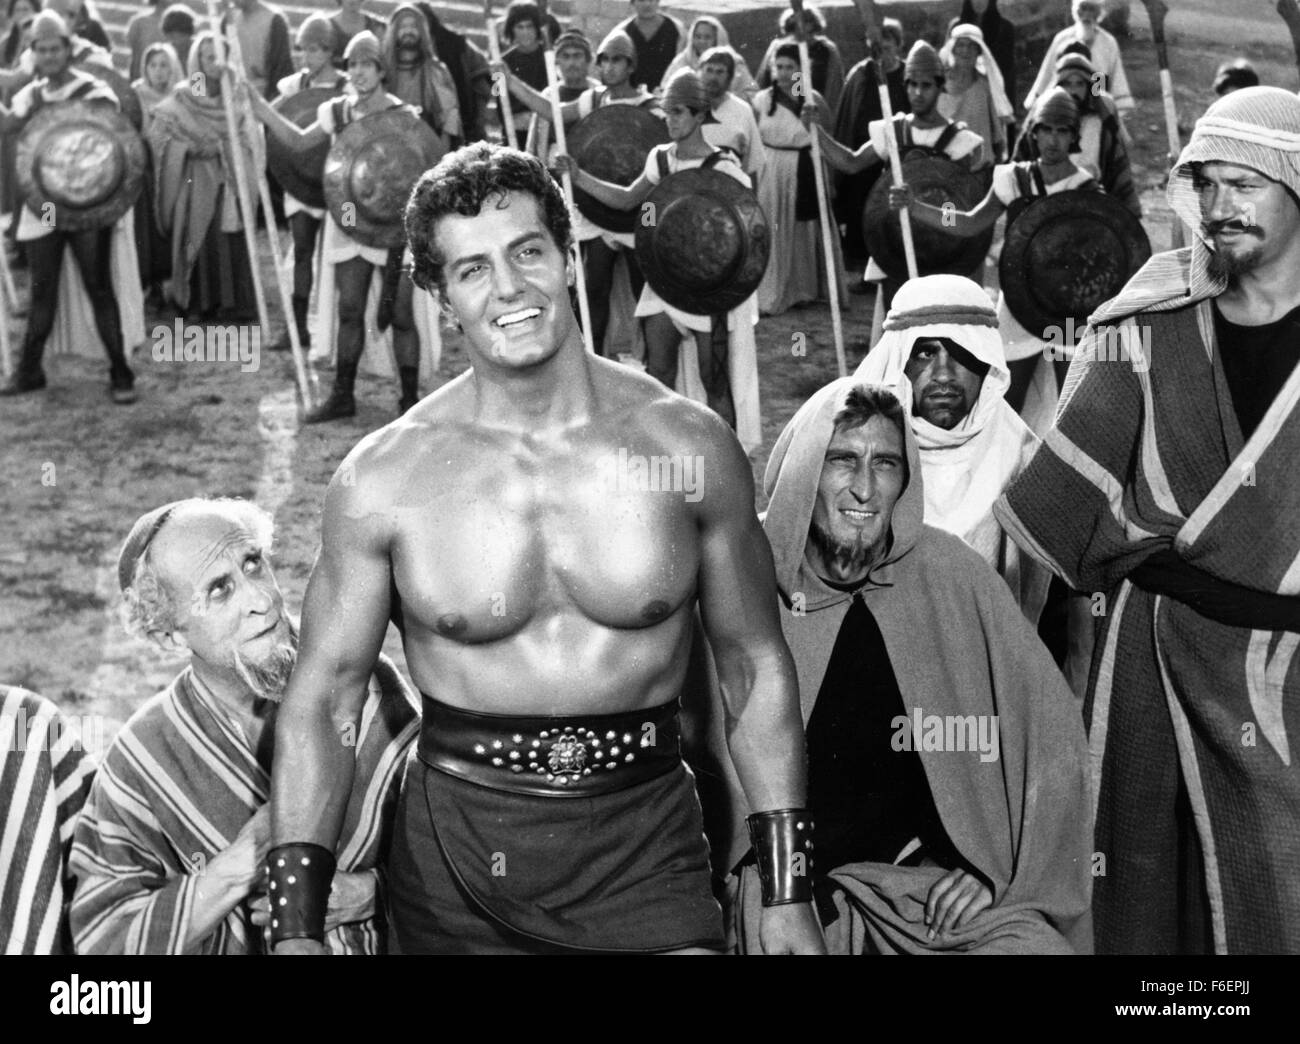 RELEASE DATE: Oct 29th, 1965. MOVIE TITLE: Gladiatore che sfido l'impero Il aka Challenge of the Gladiator (US). STUDIO: Columbia Pictures. PLOT: Treacherous Roman senator Lucius Quintilius plans a secret journey into Thrace to recover a legendary treasure. He is accompanied by his daughter Livia posing as a Christian slave girl, his cruel henchman Commodio, and Terenzius, an ex-gladiator and Nero look-alike who fools the local Thracians into believing he is the real Emperor. But Lucius's plans are thwarted by Spartacus and his band of rebels who succeed in capturing the treasure for Thrace. W Stock Photo